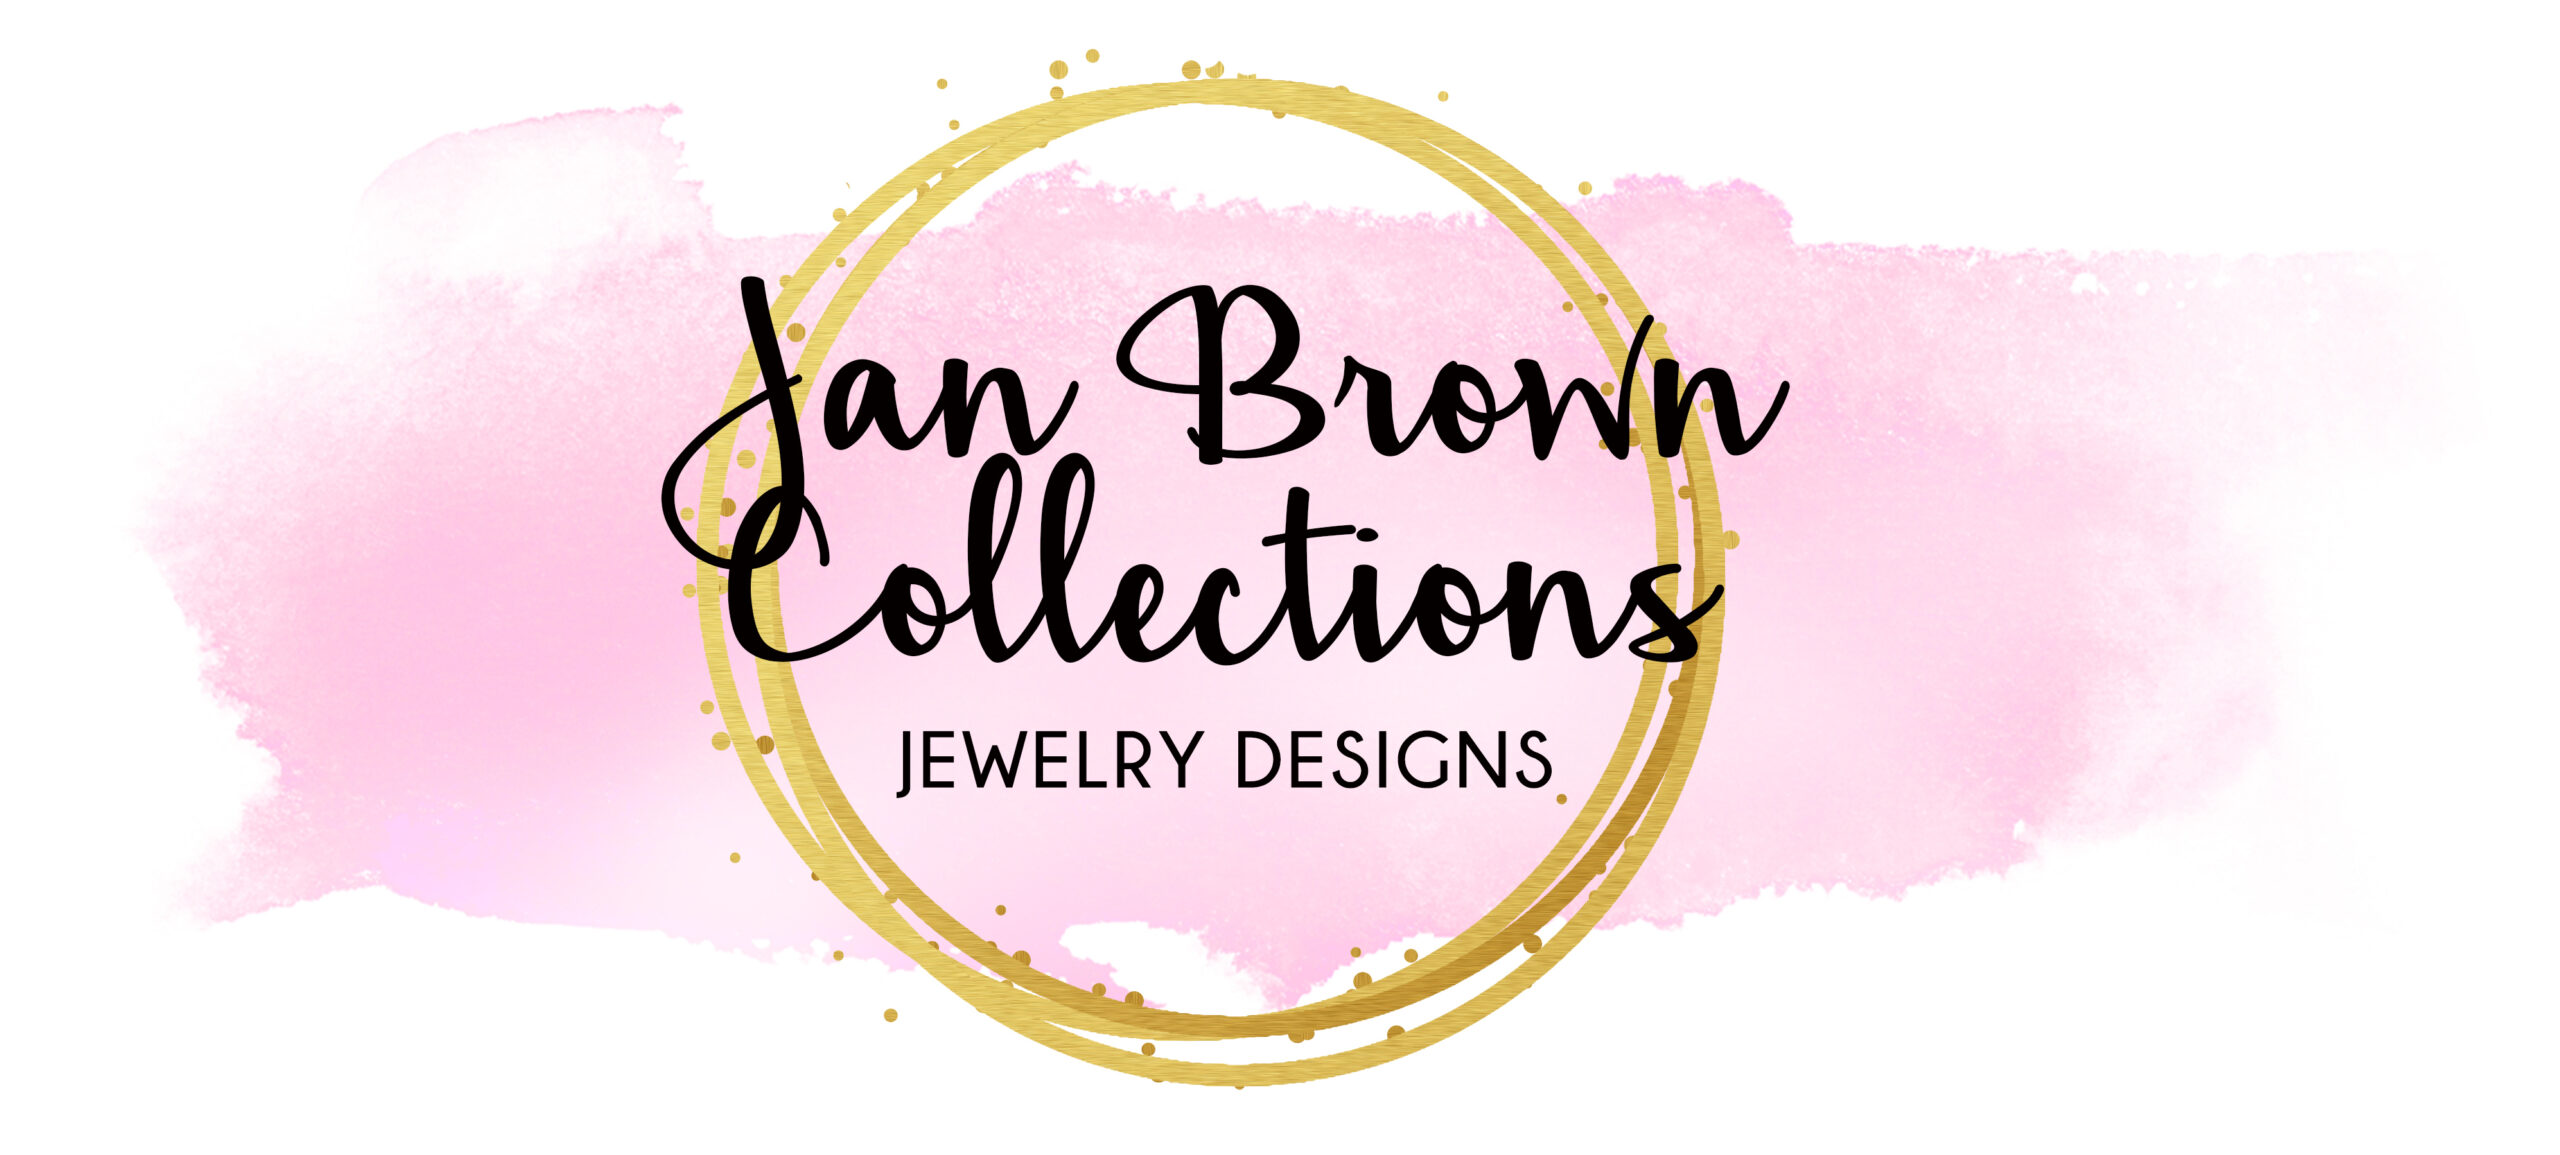 Jan Brown Collections